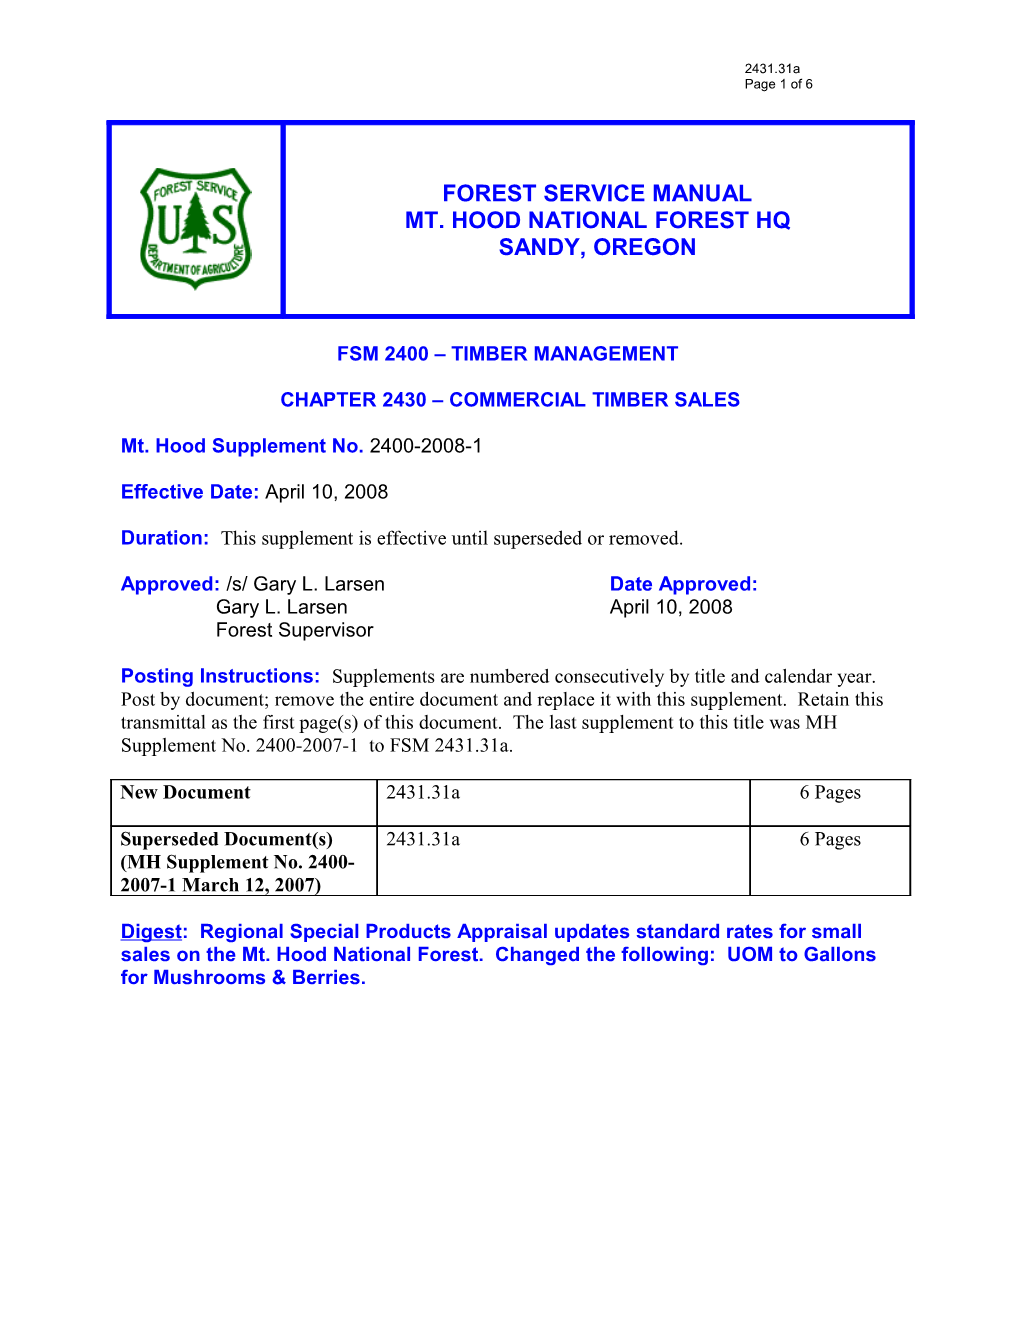 Chapter 2430 Commercial Timber Sales